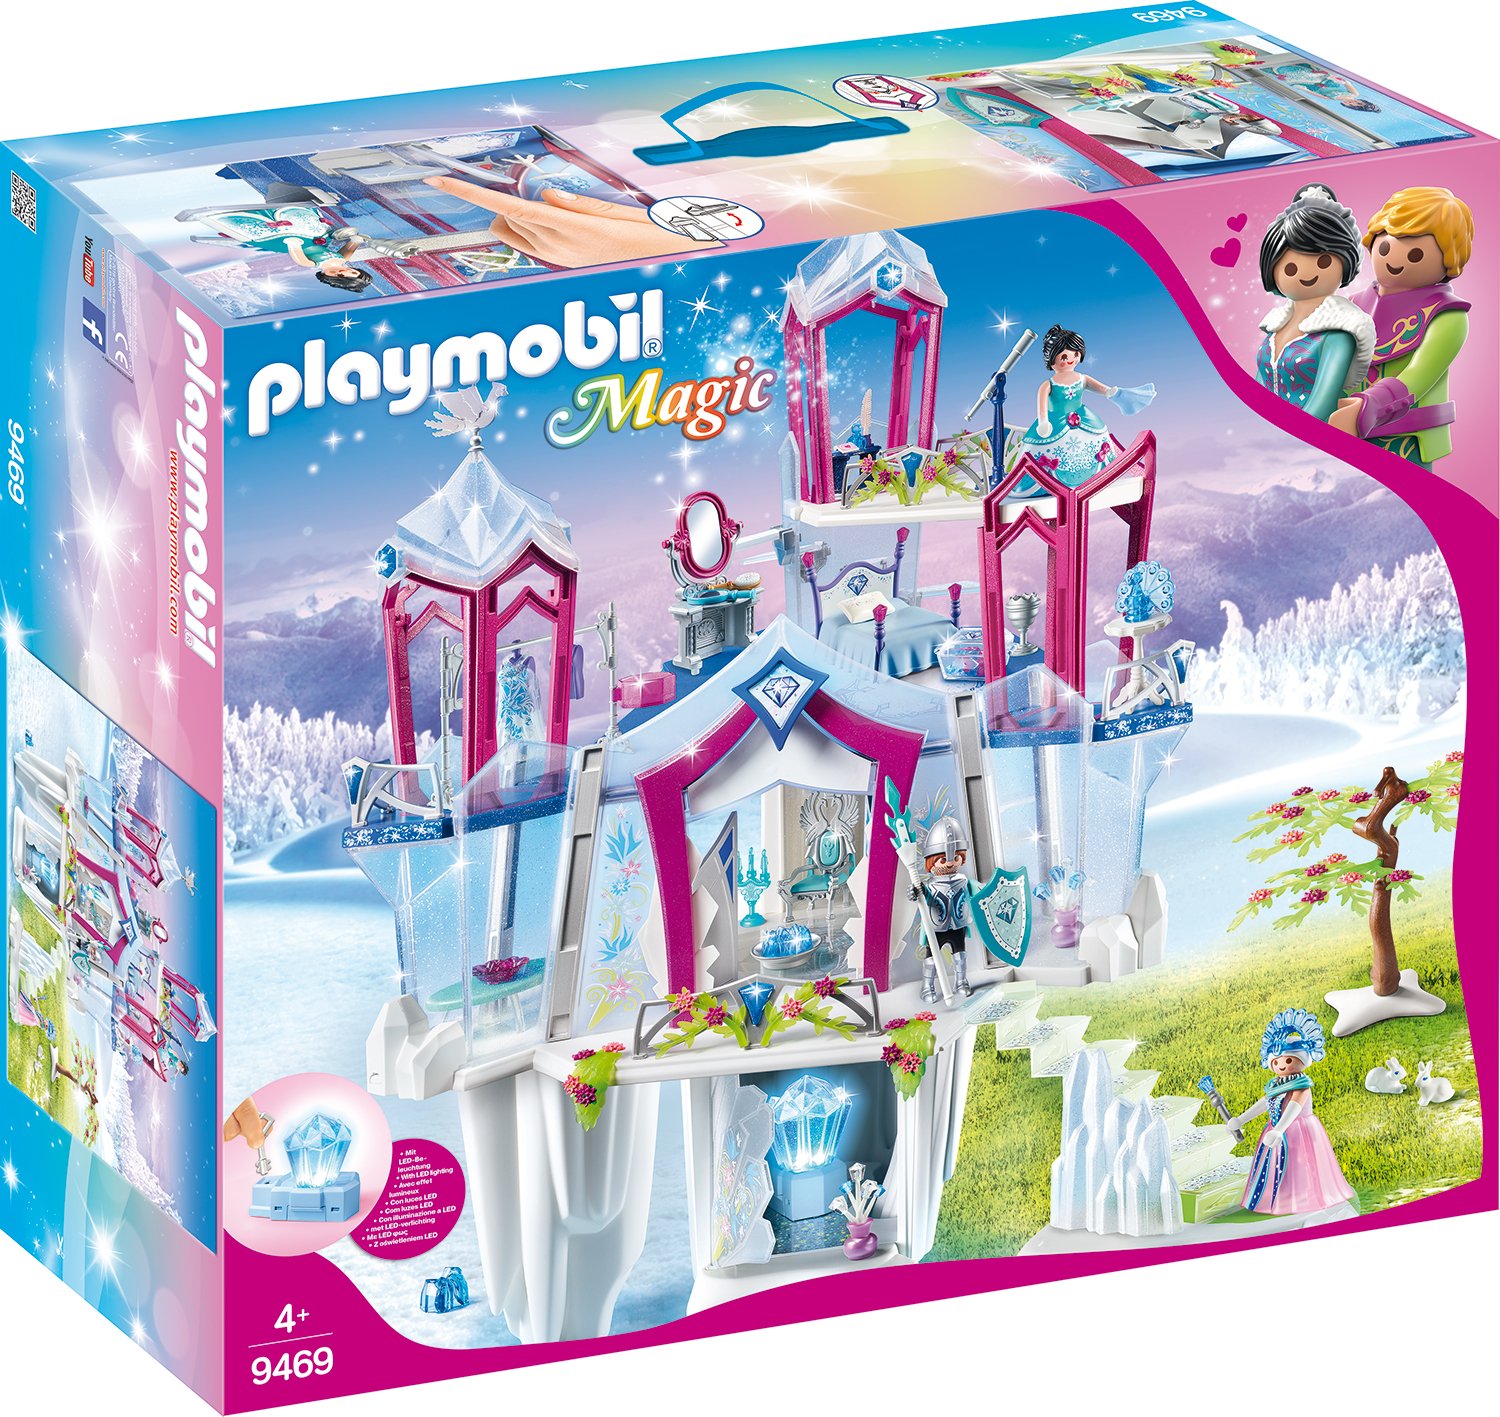 Playmobil Toy Childrens Unisex Sparkling Crystal Palace